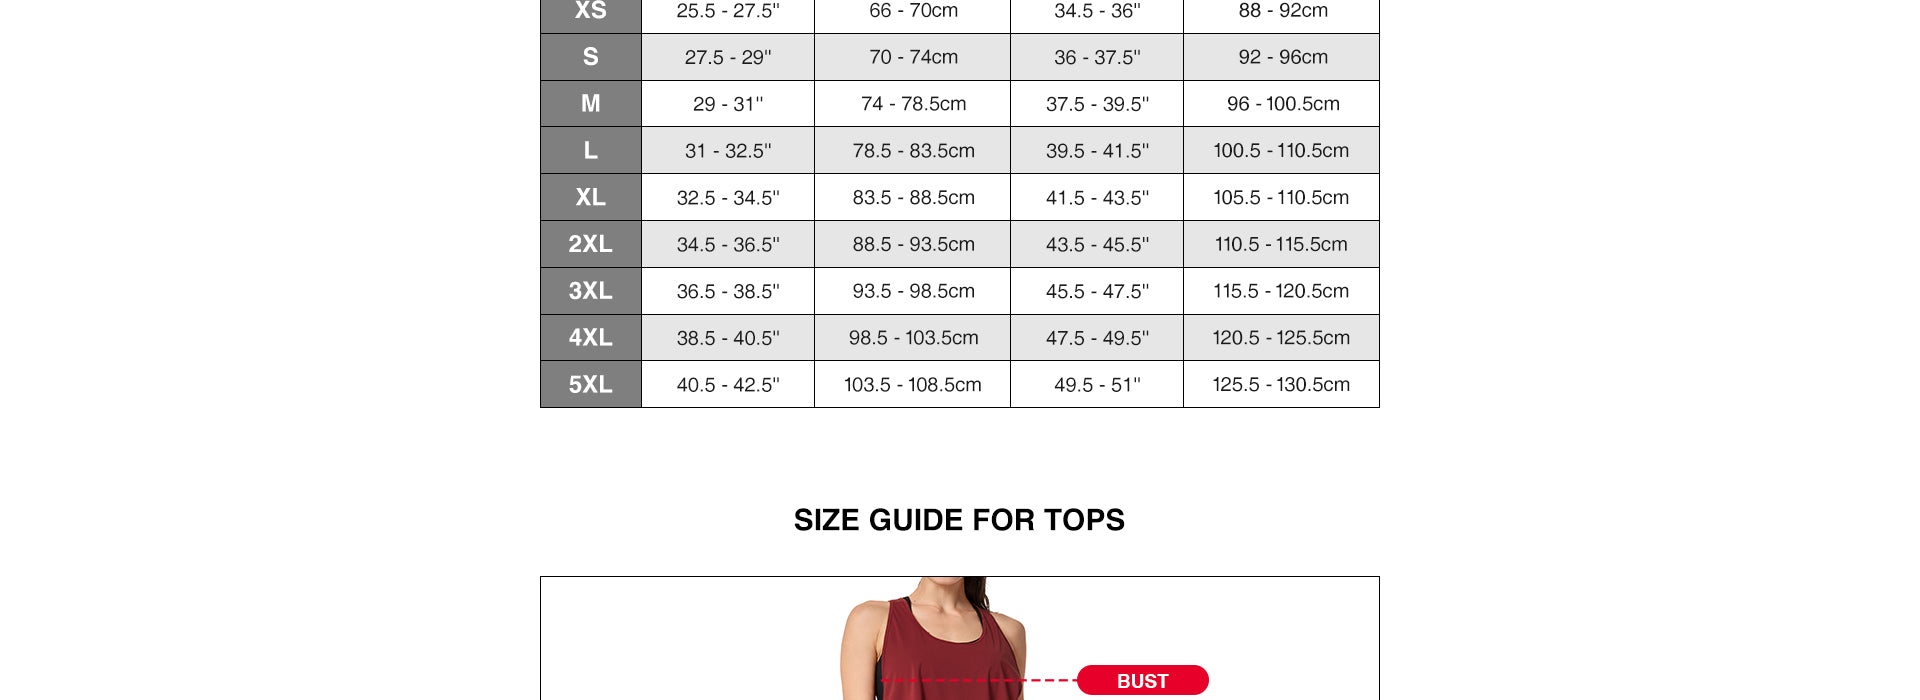 How to Measure Bra Size for Lululemon: A Simple Guide - Playbite